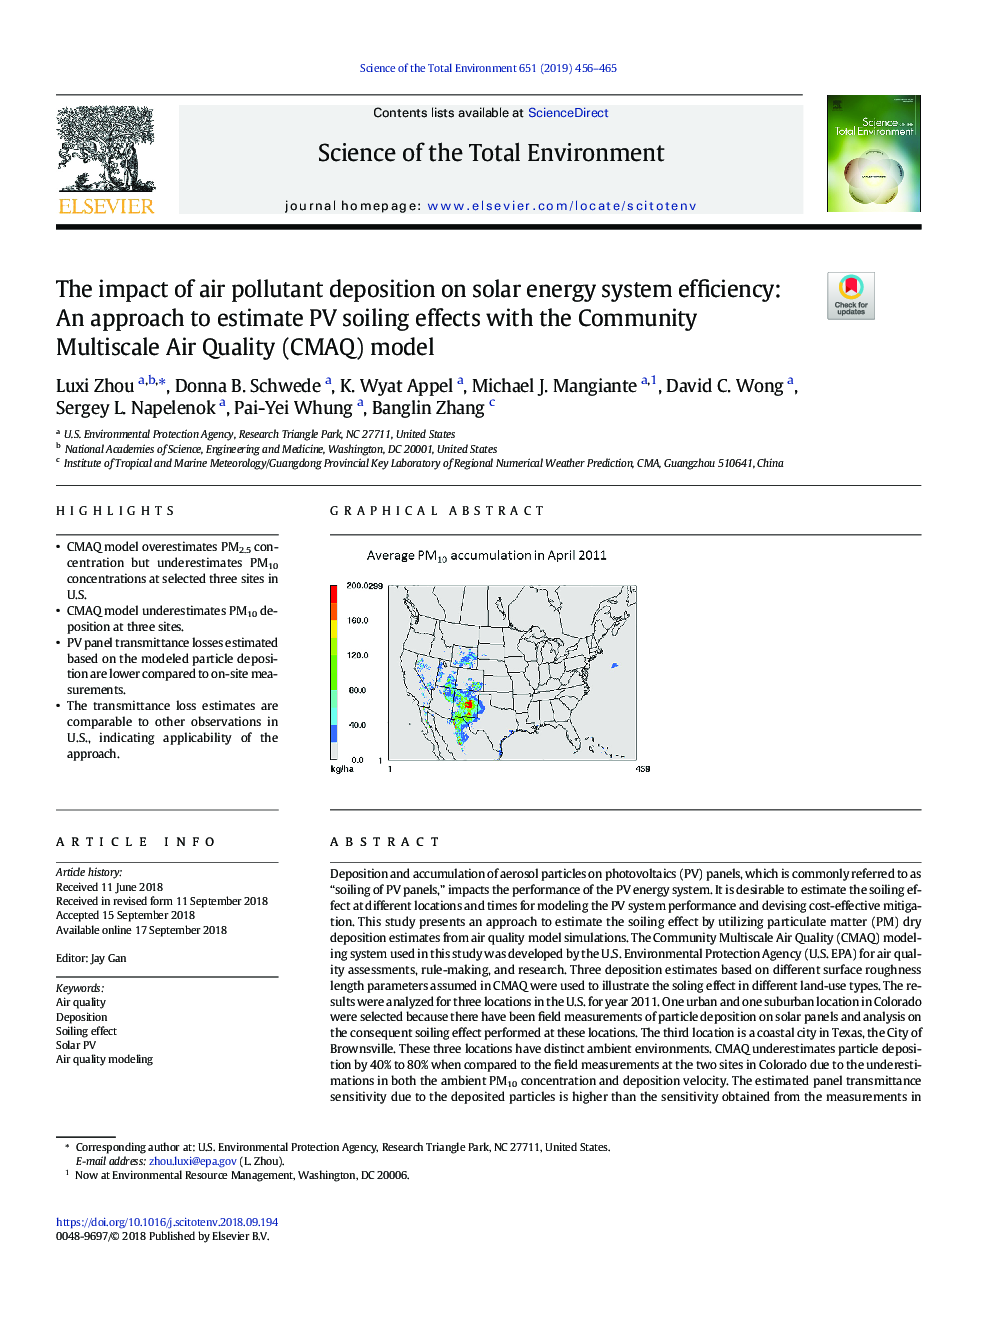 The impact of air pollutant deposition on solar energy system efficiency: An approach to estimate PV soiling effects with the Community Multiscale Air Quality (CMAQ) model